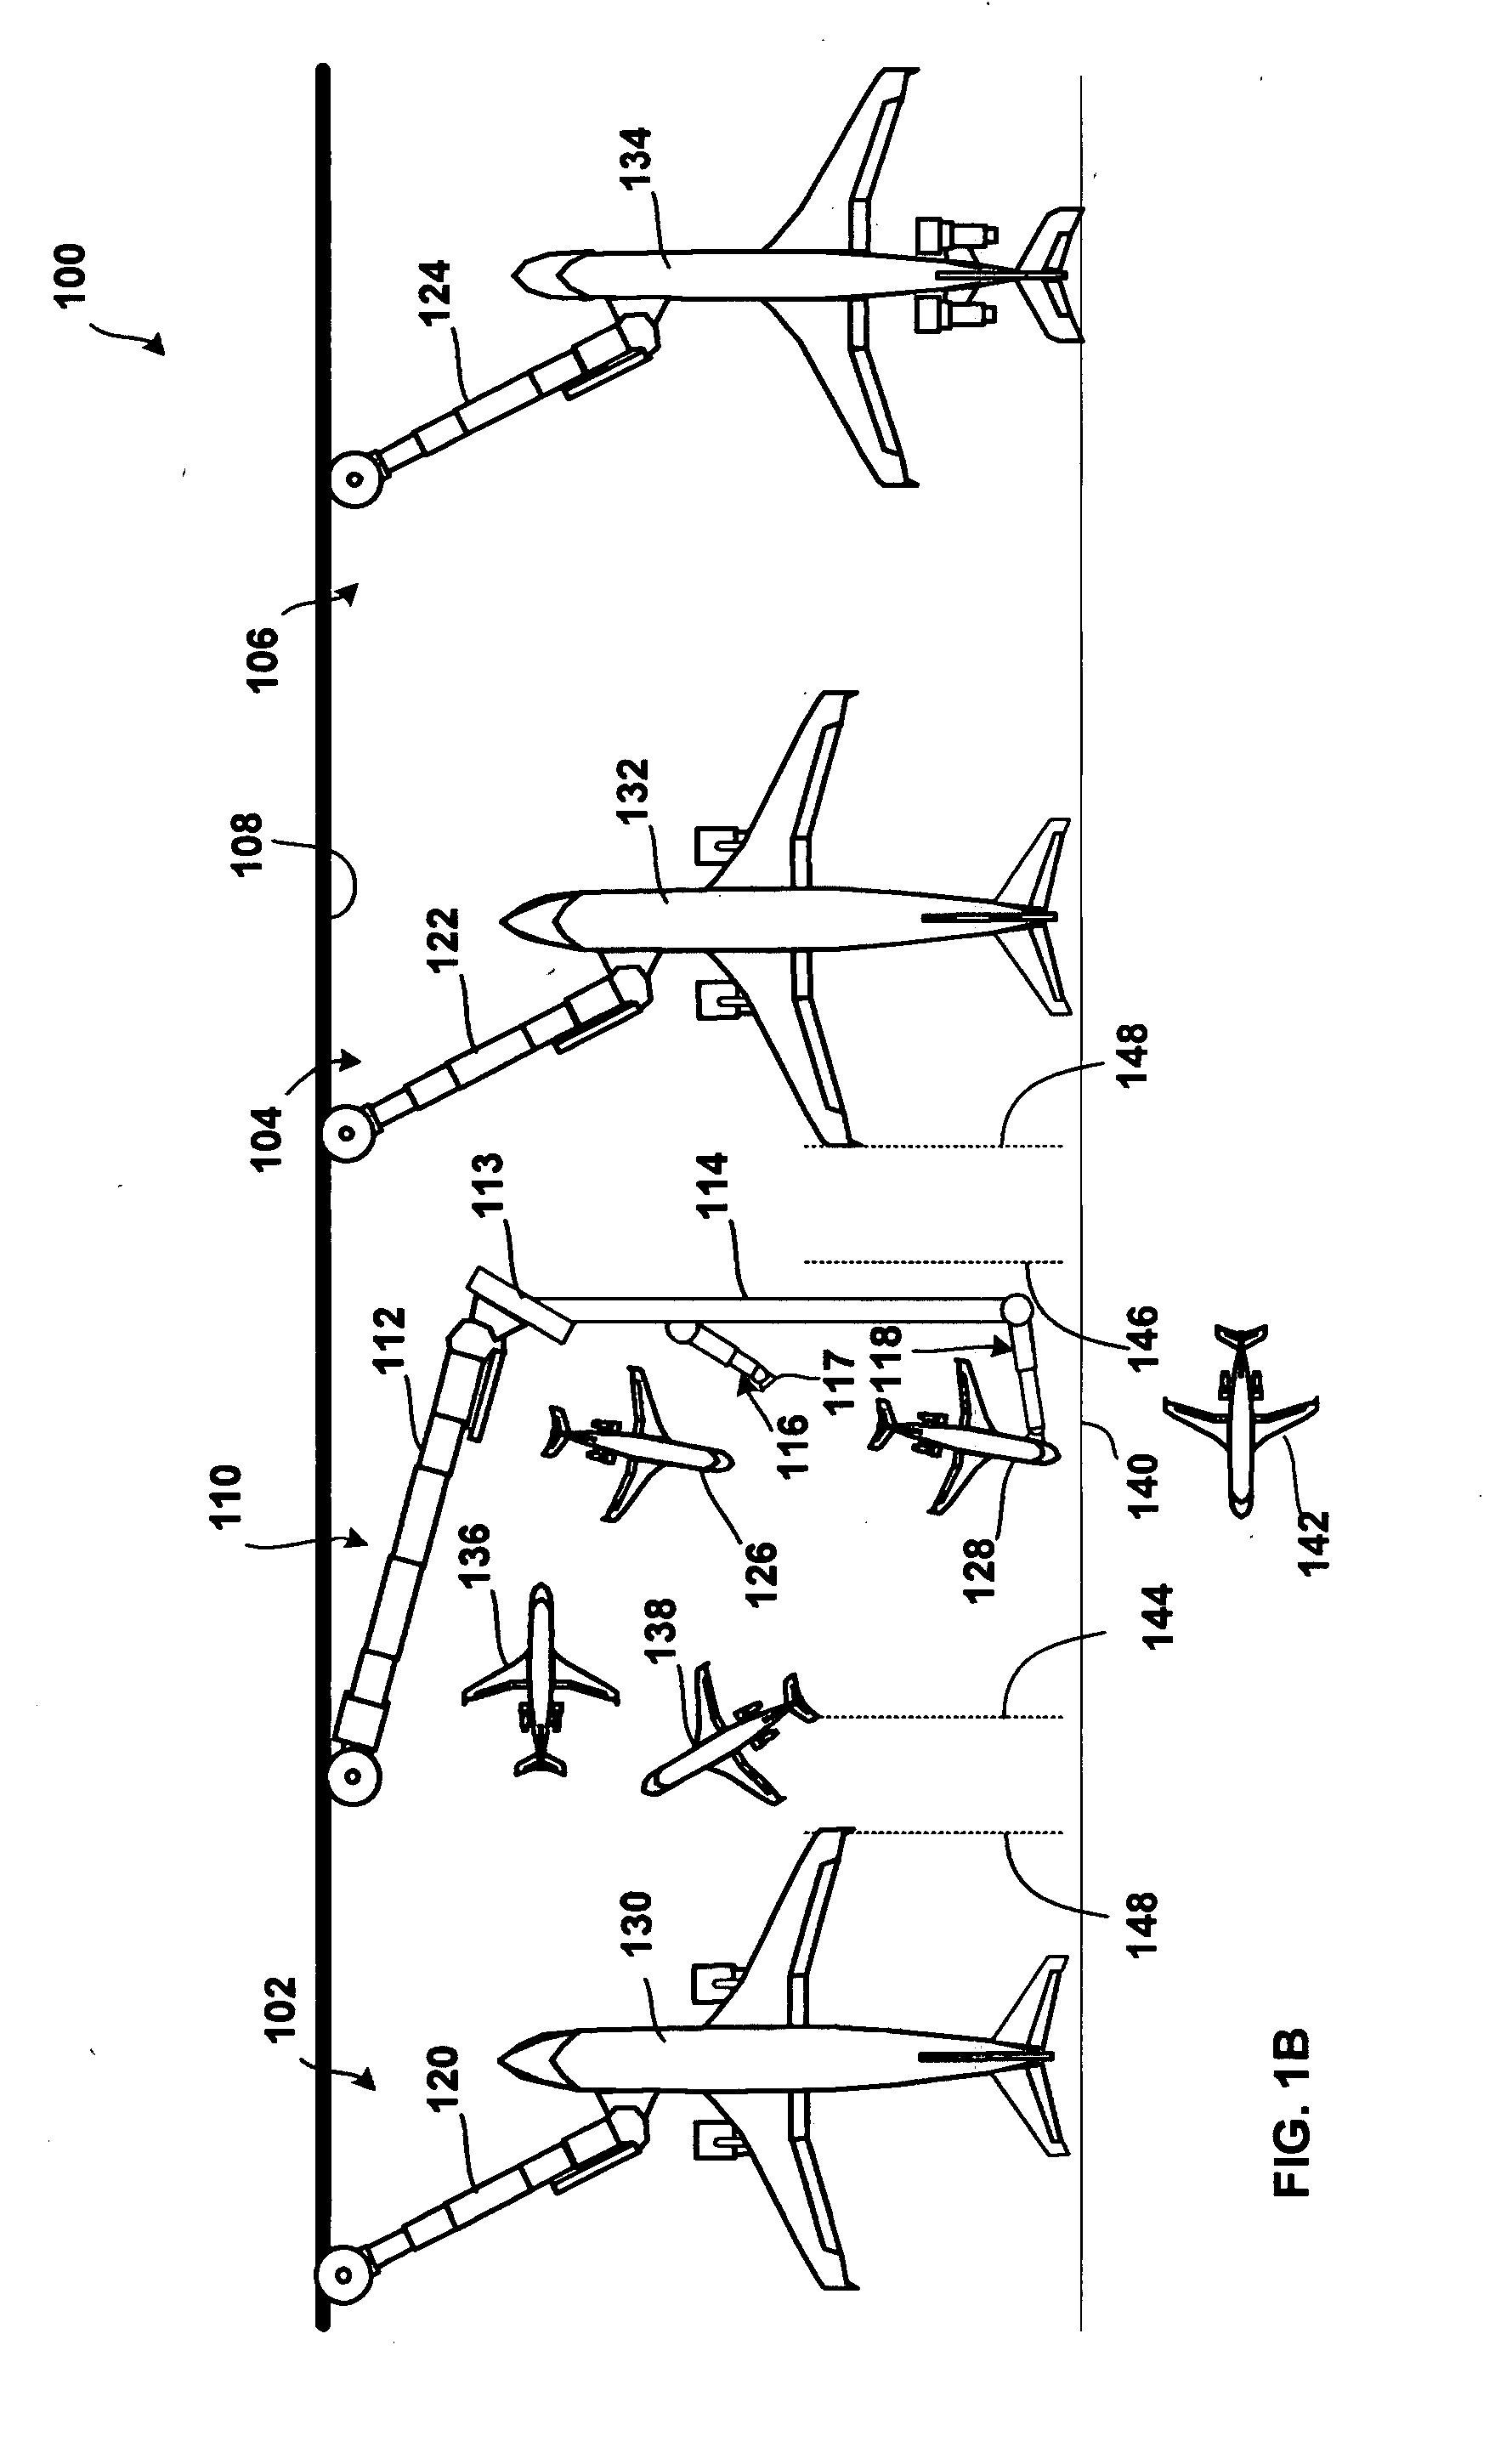 Air-taxi stands, boarding bridges for air taxis, and methods of using same